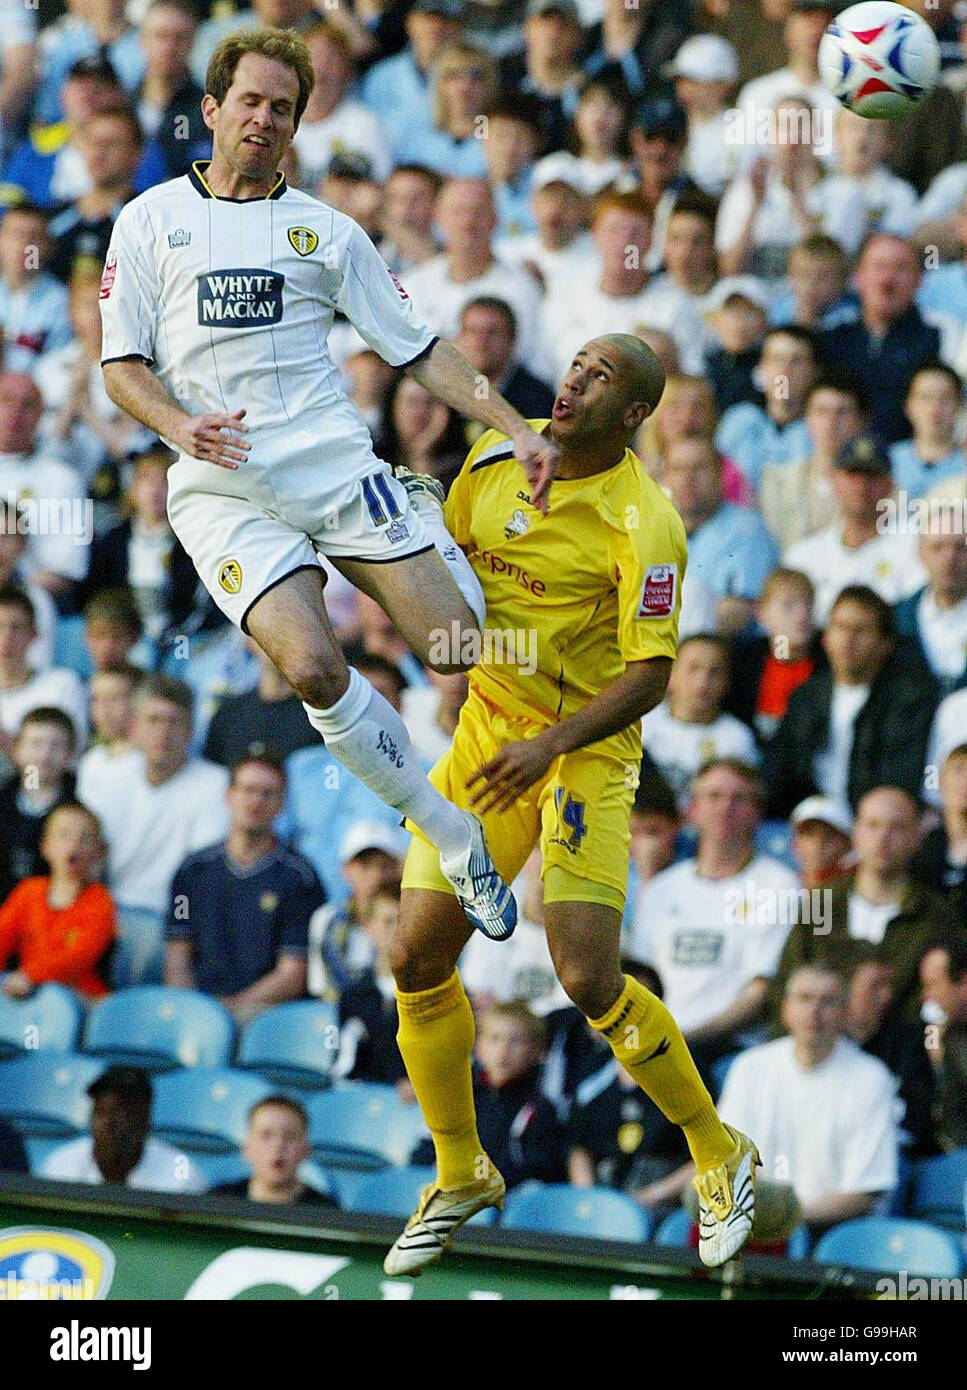 Leeds United's Eddie Lewis (L) challenges Preston's Tyrone Mears for the ball during the Coca-Cola Championship play-off semi-final first leg match at Elland Road, Leeds. Stock Photo